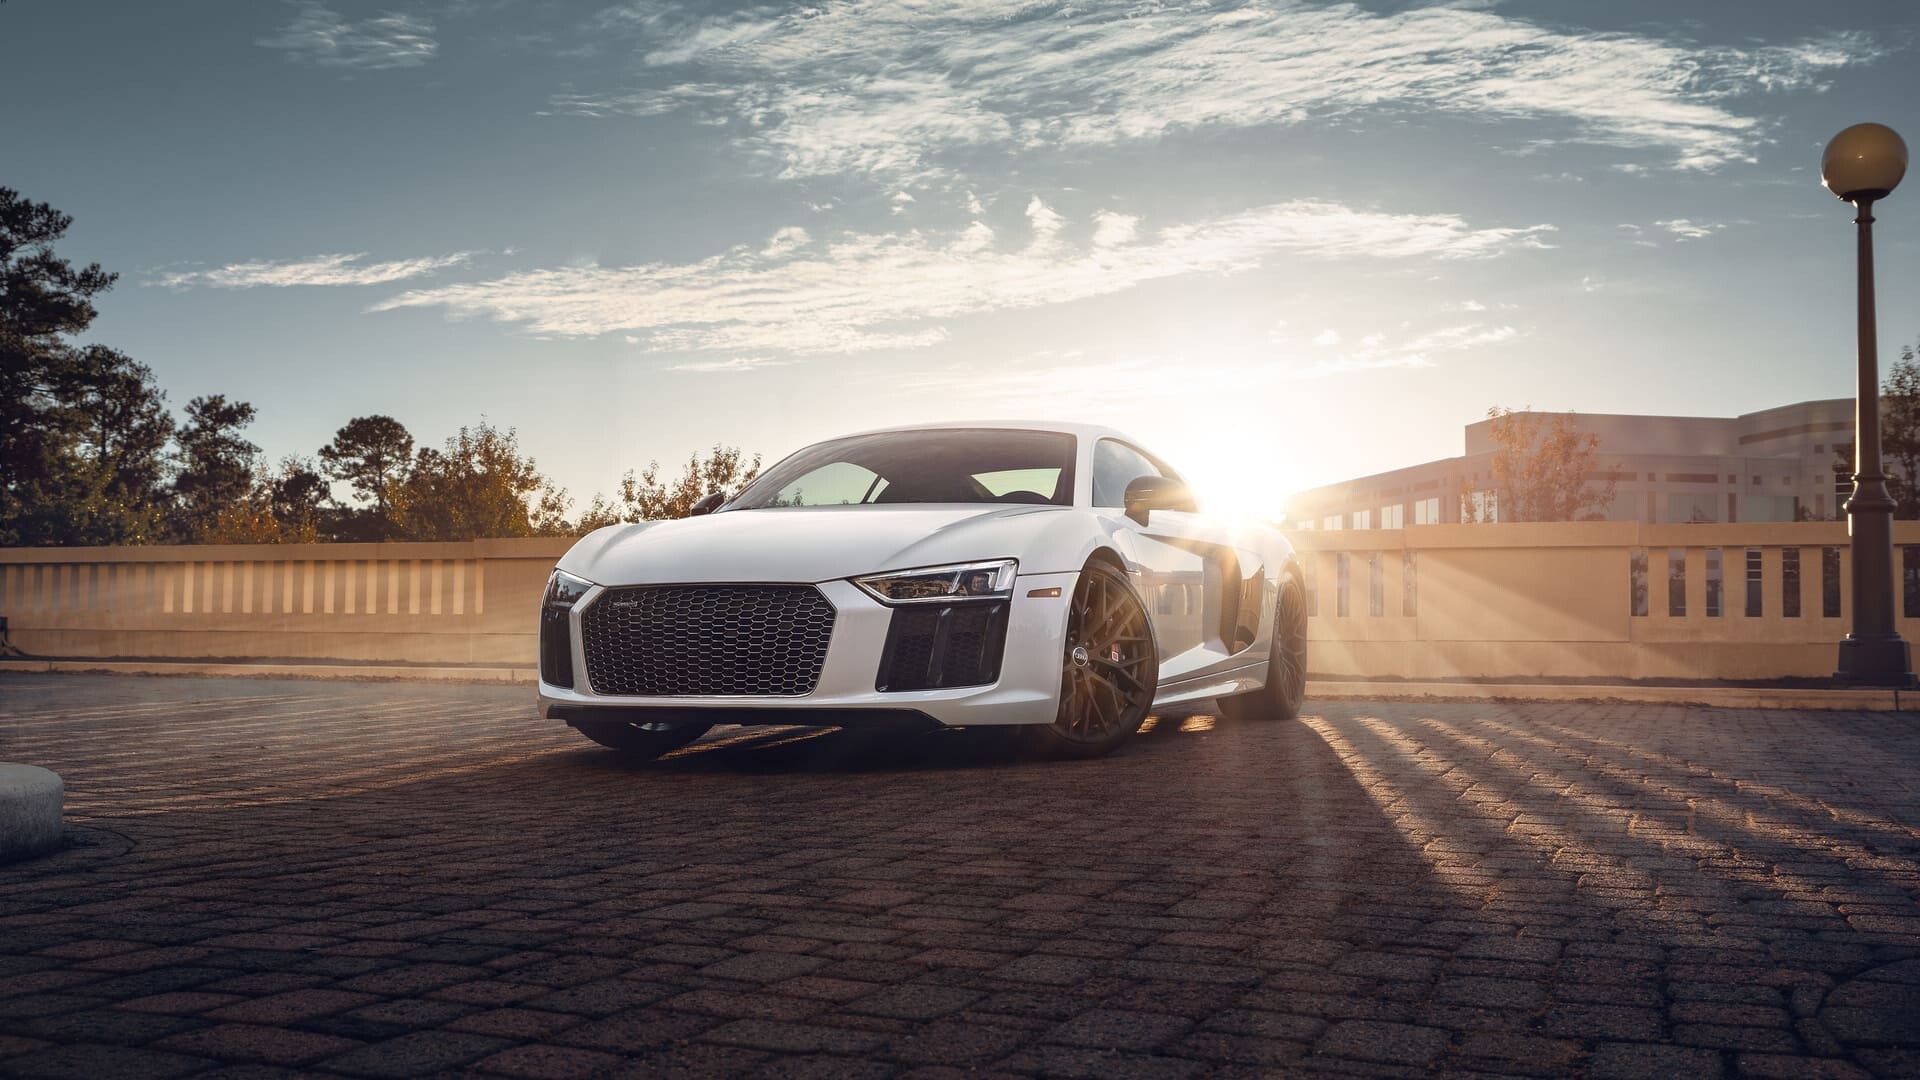 Audi: A subsidiary of Volkswagen AG, The first company to ever crash test its cars. 1920x1080 Full HD Wallpaper.